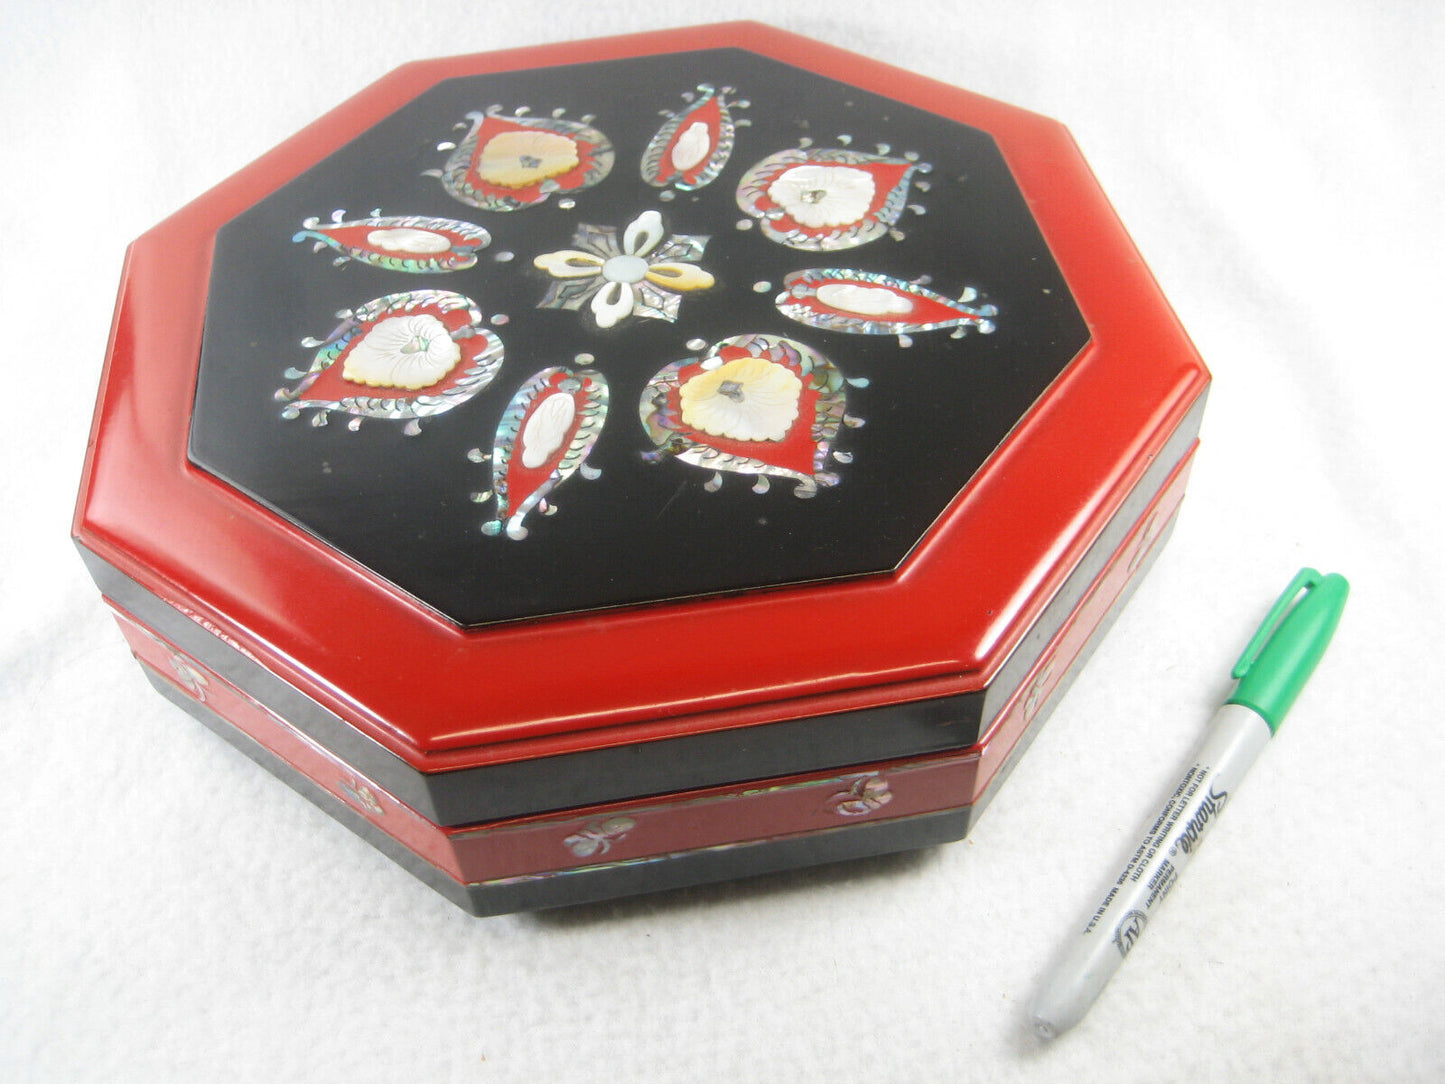 Octagonal Red & Black Lacquer Lidded Box W/ 5 Smaller Boxes Inside 10"X10"